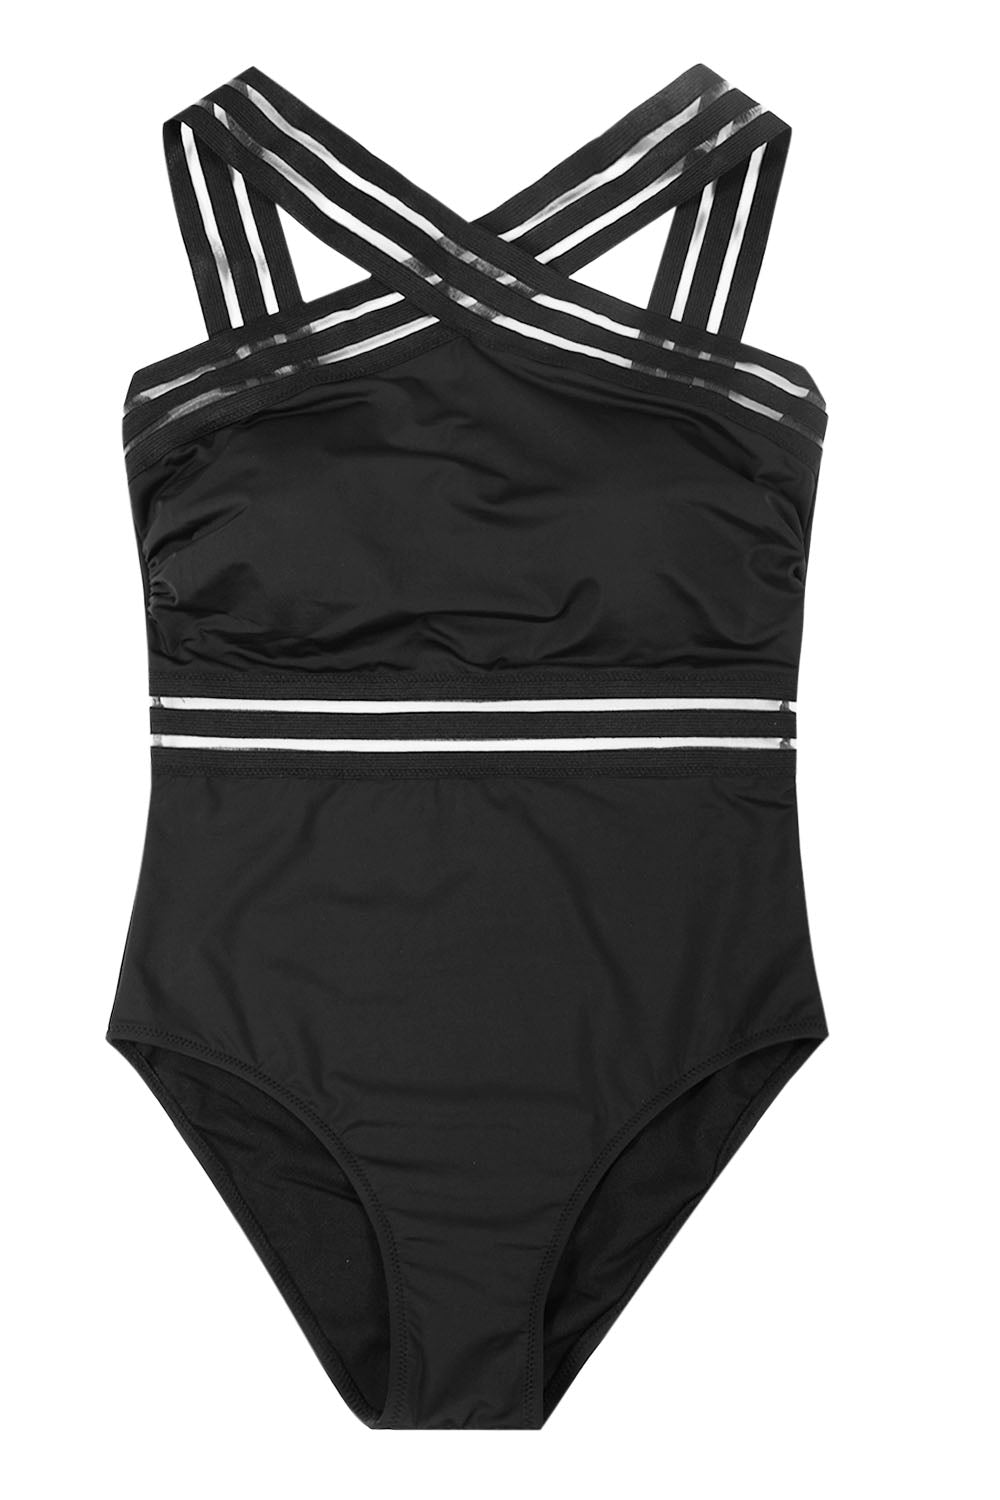 Iyasson Womens Sexy Hollow Strap Cross Backless Swimsuit